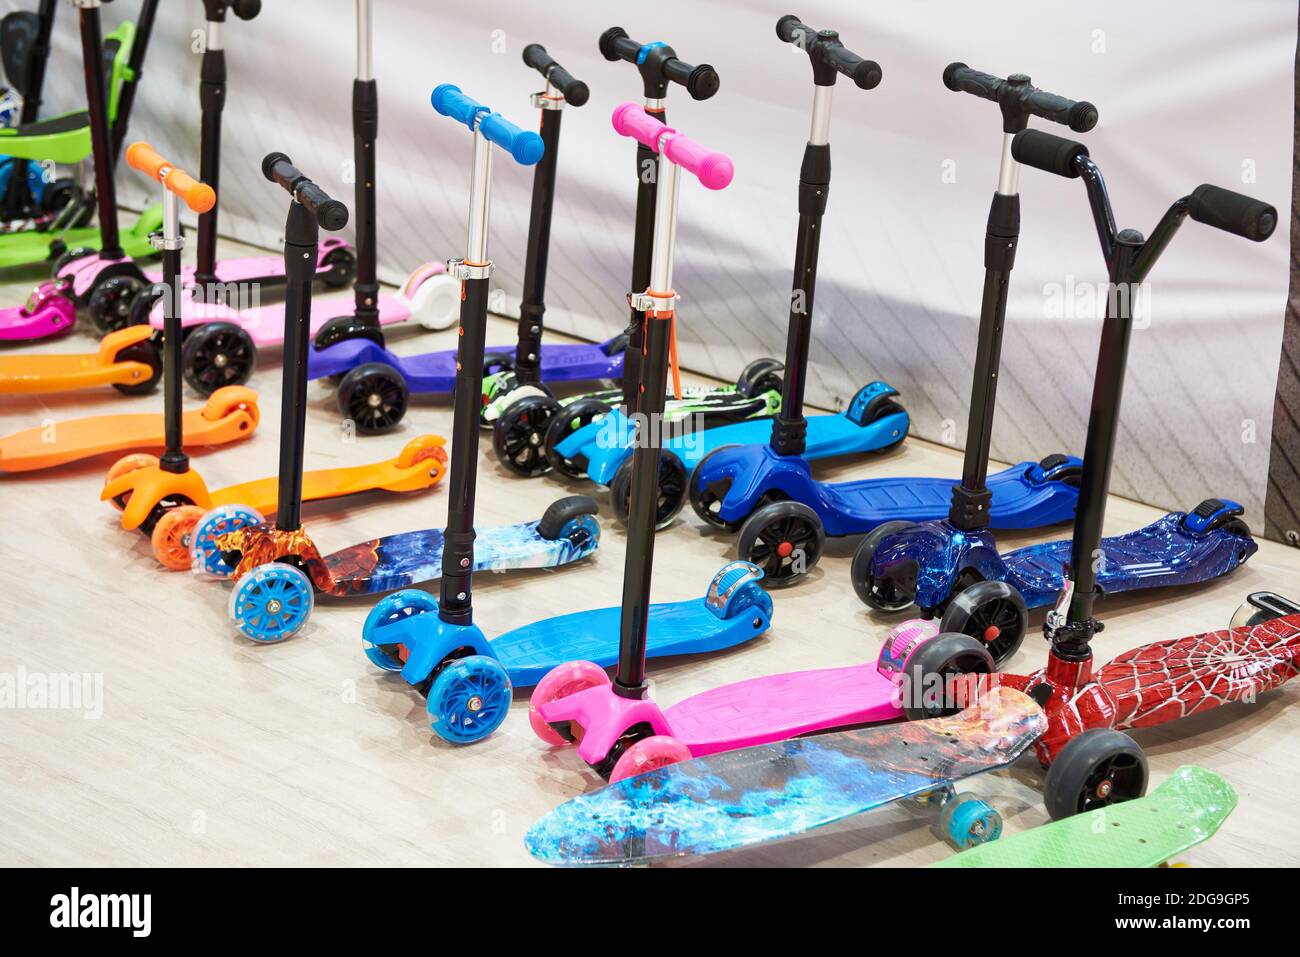 Children's scooters in the store Stock Photo